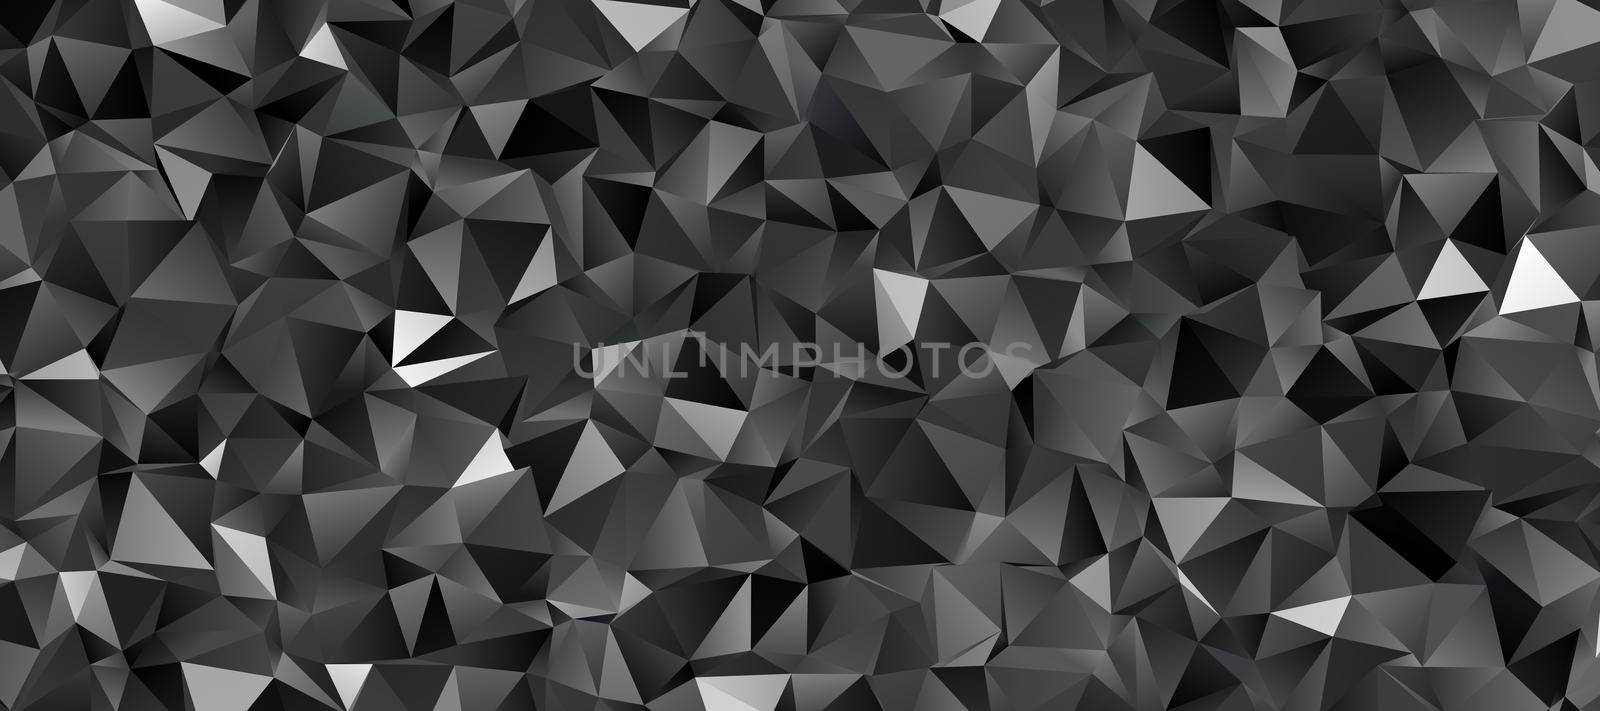 Abstract black triangle background, low poly pattern by dutourdumonde